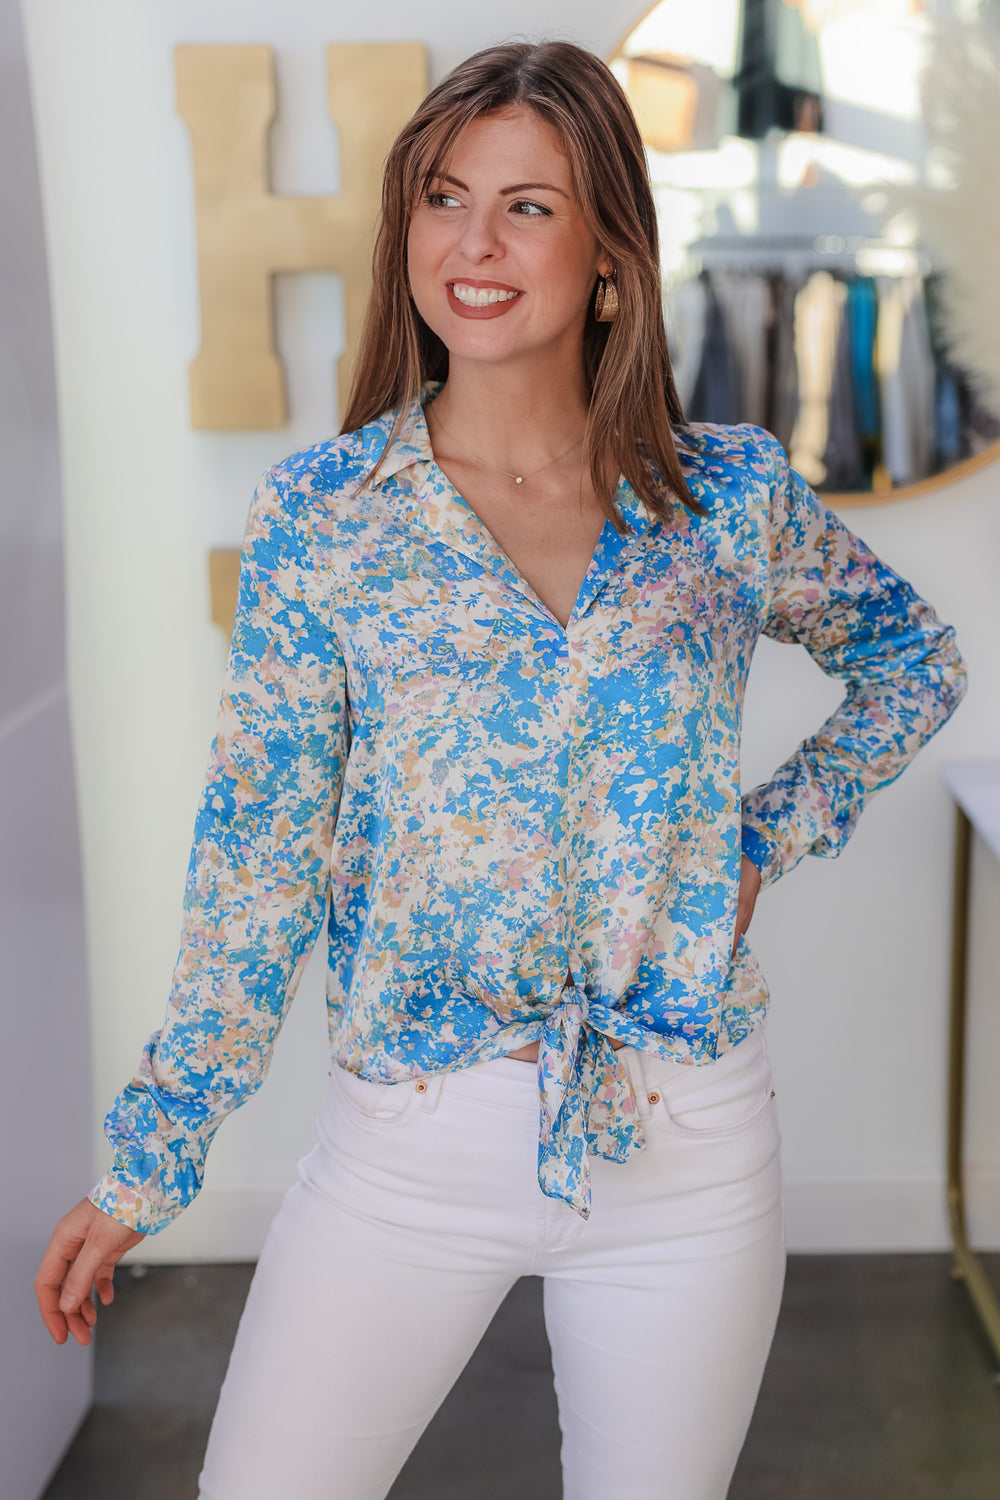 A brunette woman standing in a shop wearing a satin tie front blouse with white jeans. The colors in the top are blue, pink, white, yellow and cream.